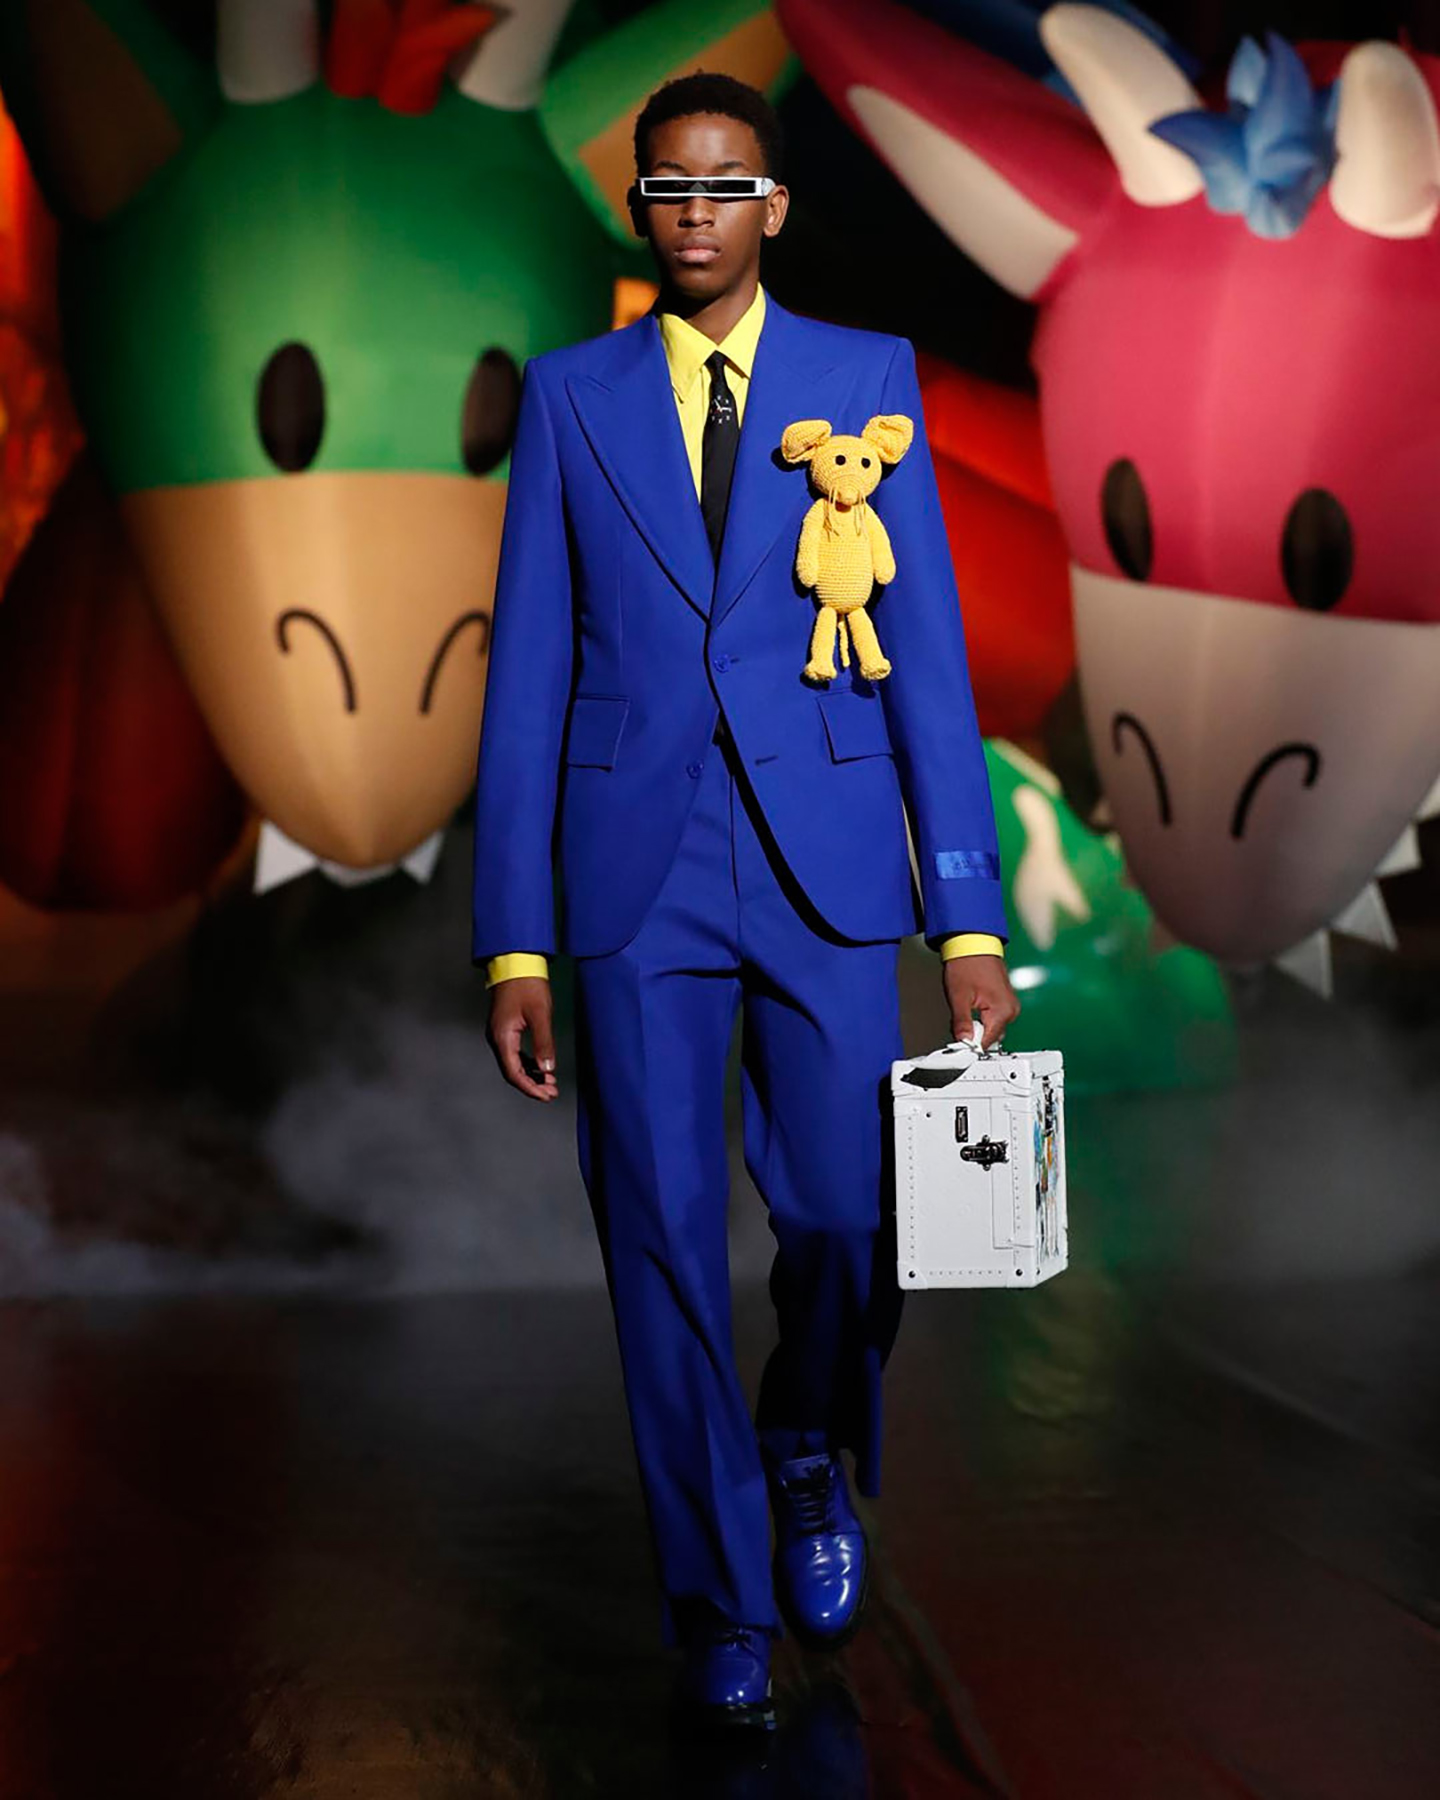 Louis Vuitton's SS21 odyssey comes to an end in Tokyo